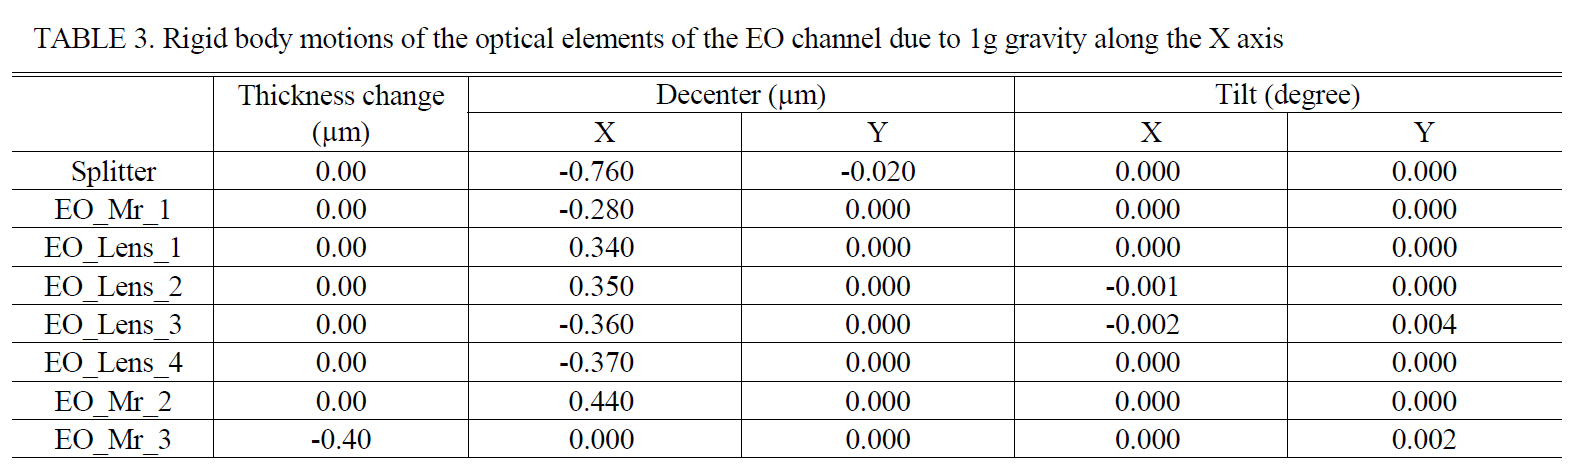 Rigid body motions of the optical elements of the EO channel due to 1g gravity along the X axis